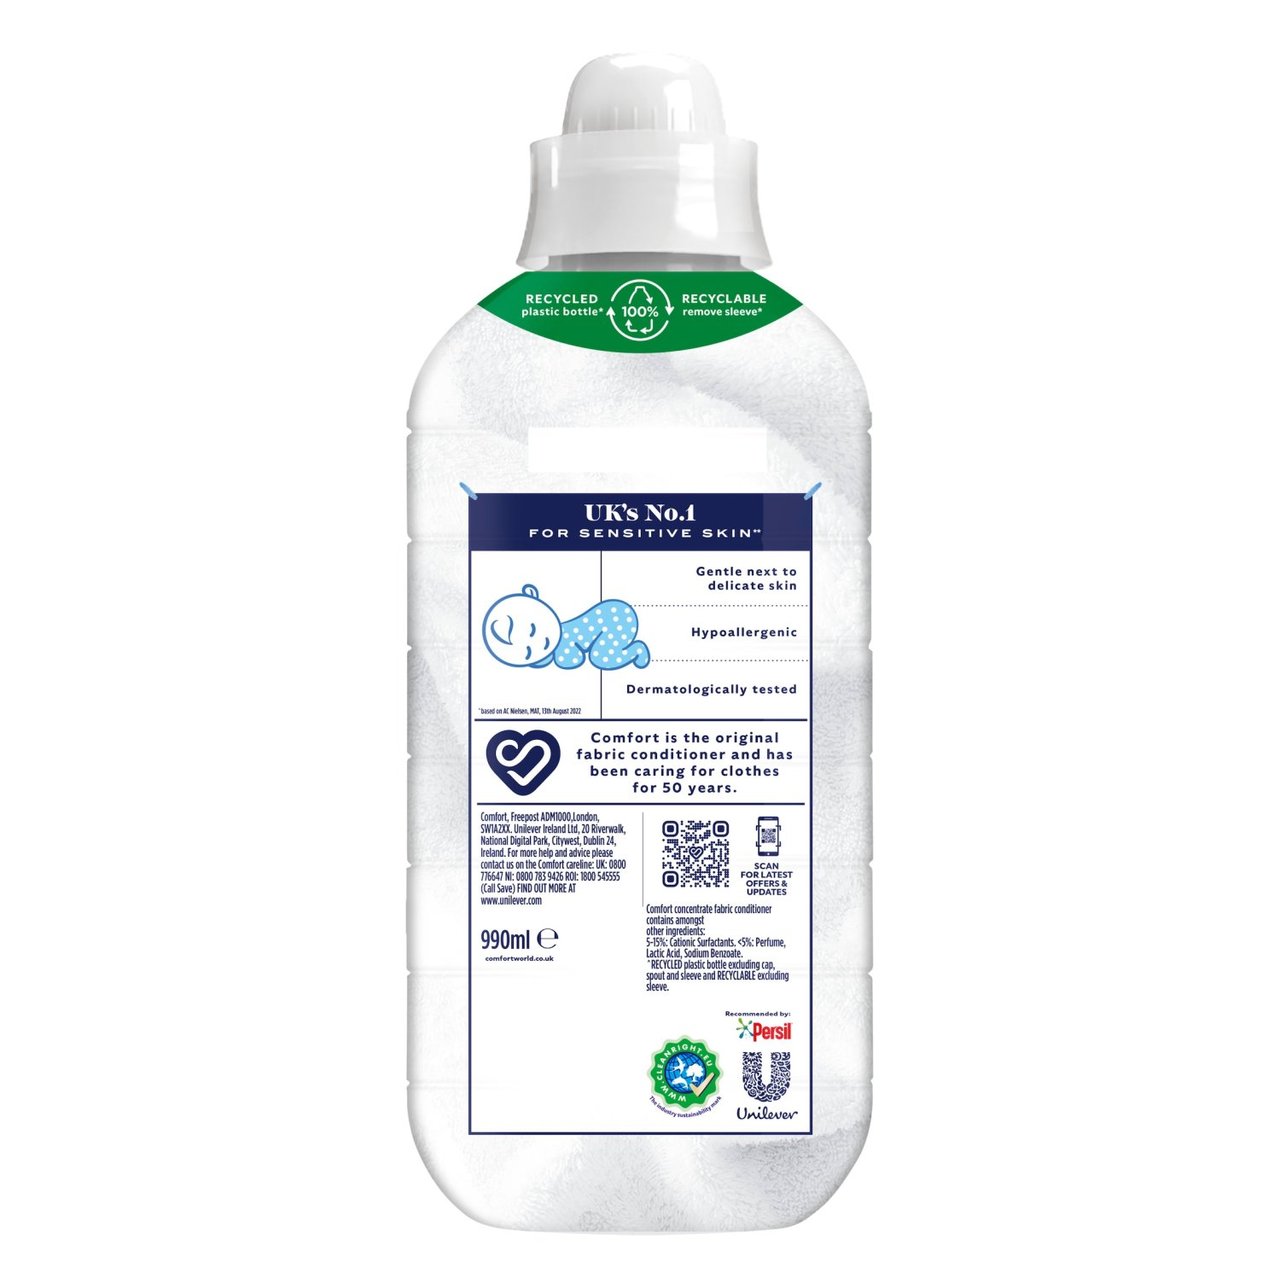 Comfort Pure Ultra-Concentrated Fabric Conditioner 78 Wash